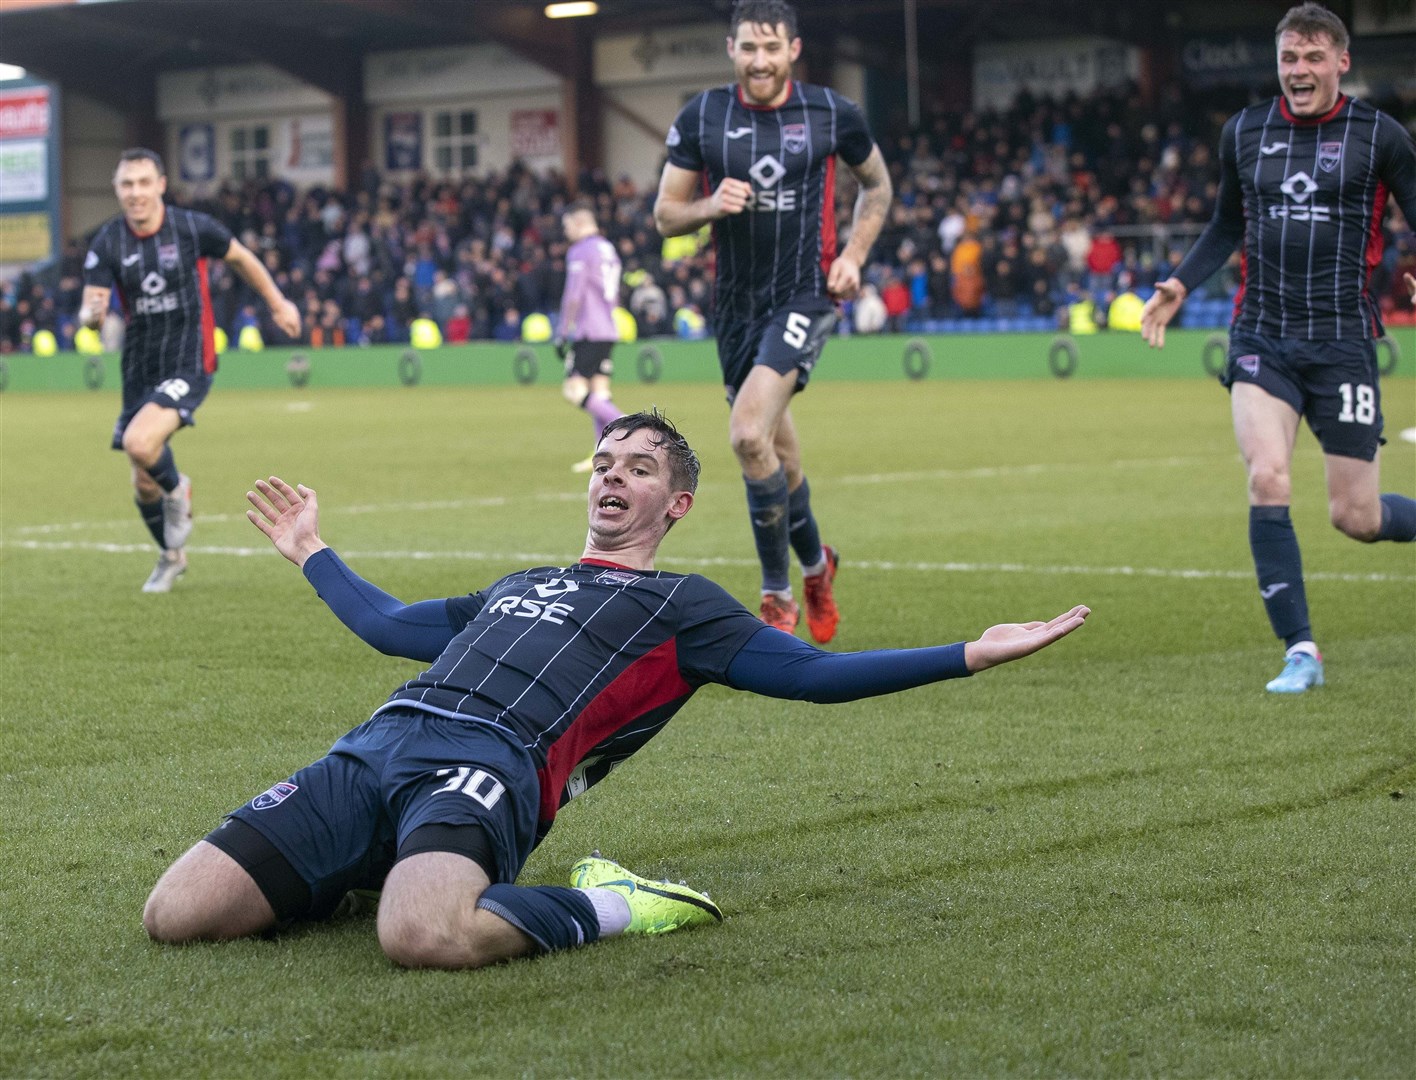 Picture - Ken Macpherson. Ross County(3) v Rangers(3). 29.01.22. Ross County's Matthew Wright celebrates his late equalising goal.